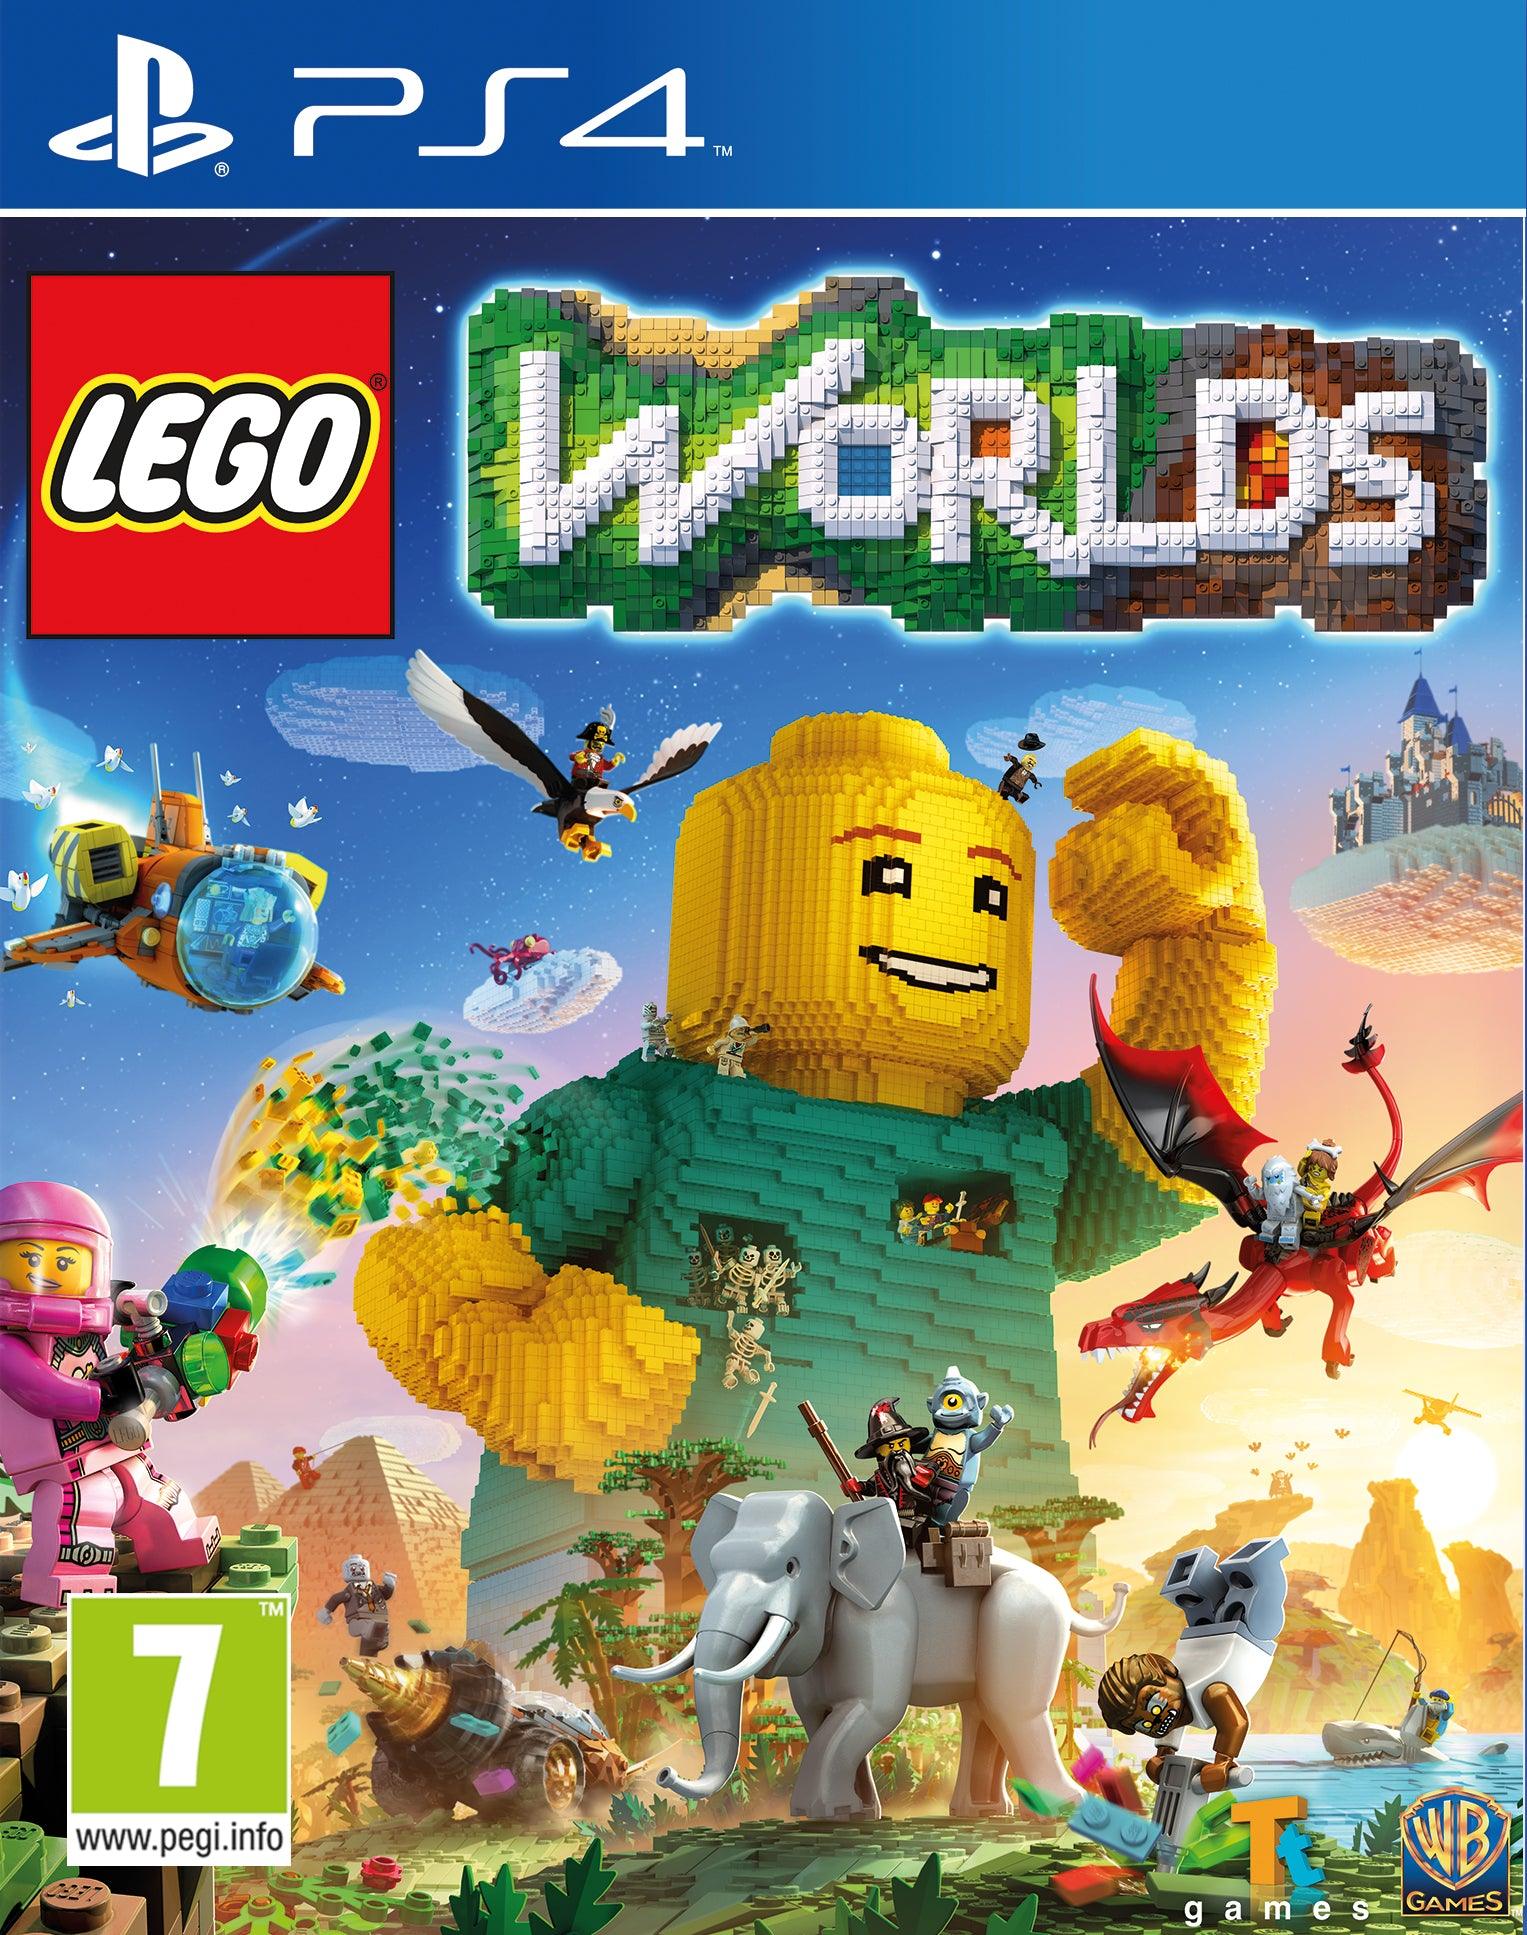 Lego Worlds - Want a New Gadget